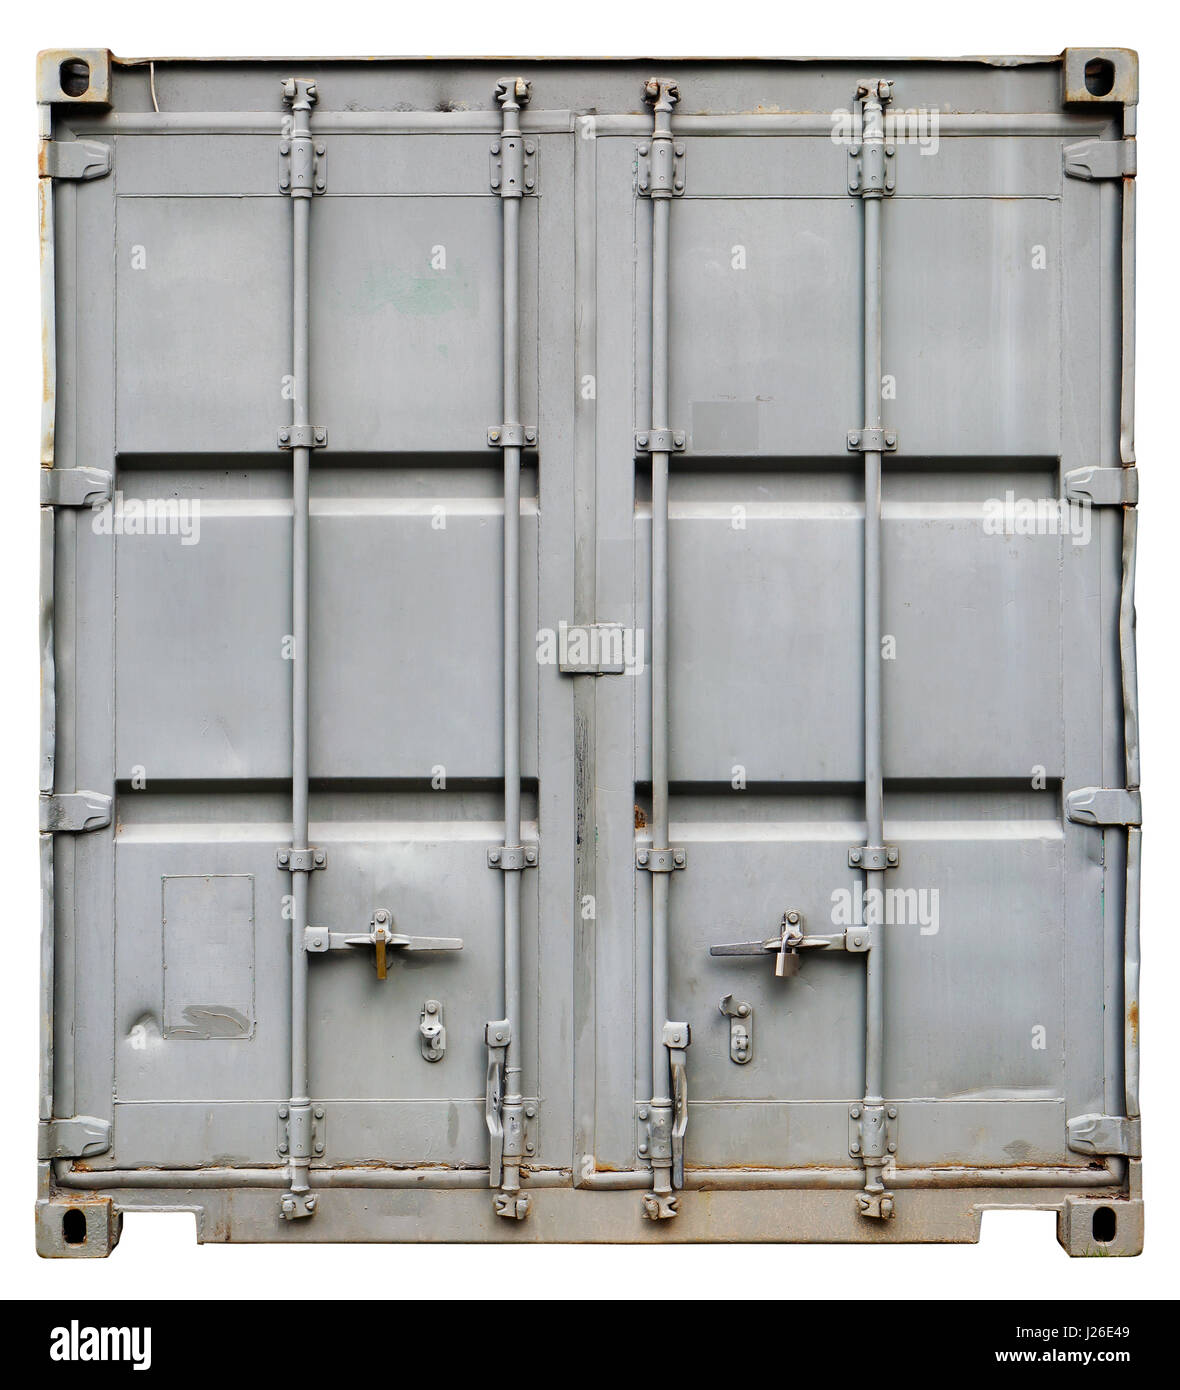 Door and locking mechanisms of a steel gray old rusty sea cargo container. Isolated with patch Stock Photo